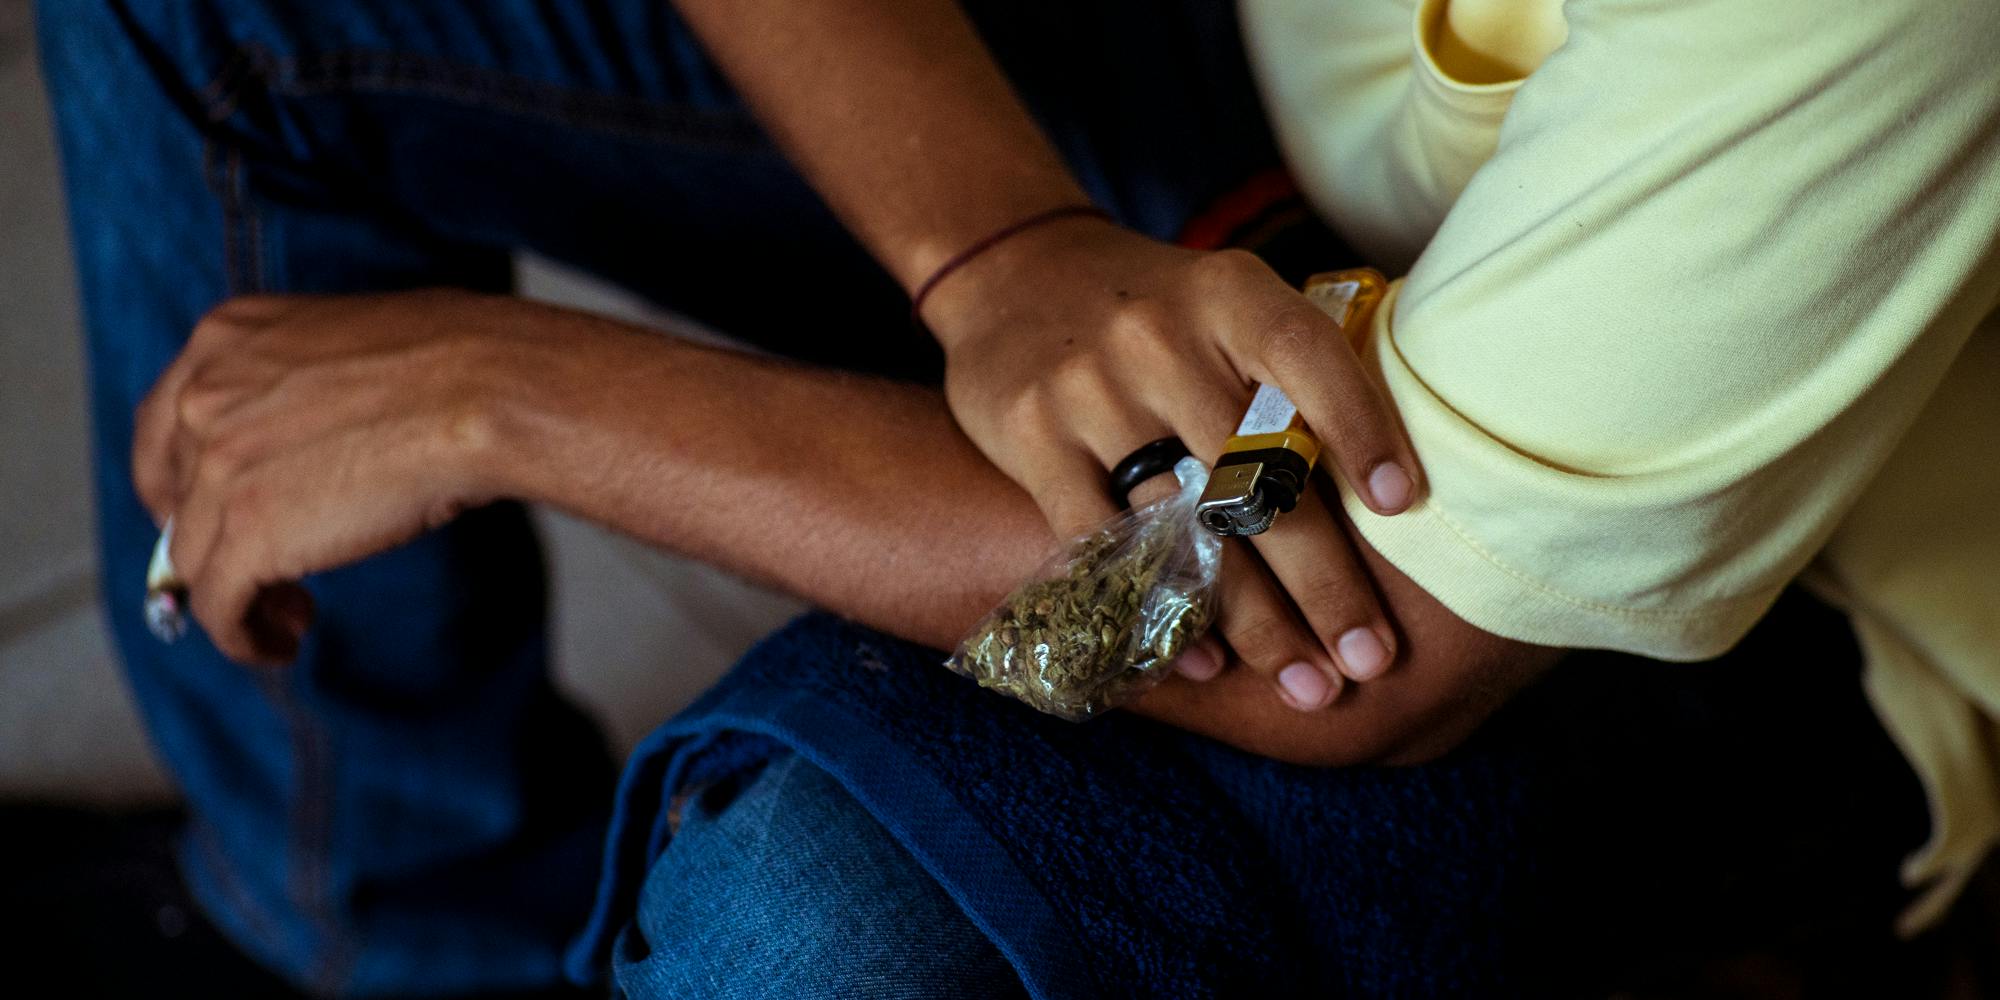 Jamaica's Health Ministry Warns People Against Smoking Weed That's Too Strong